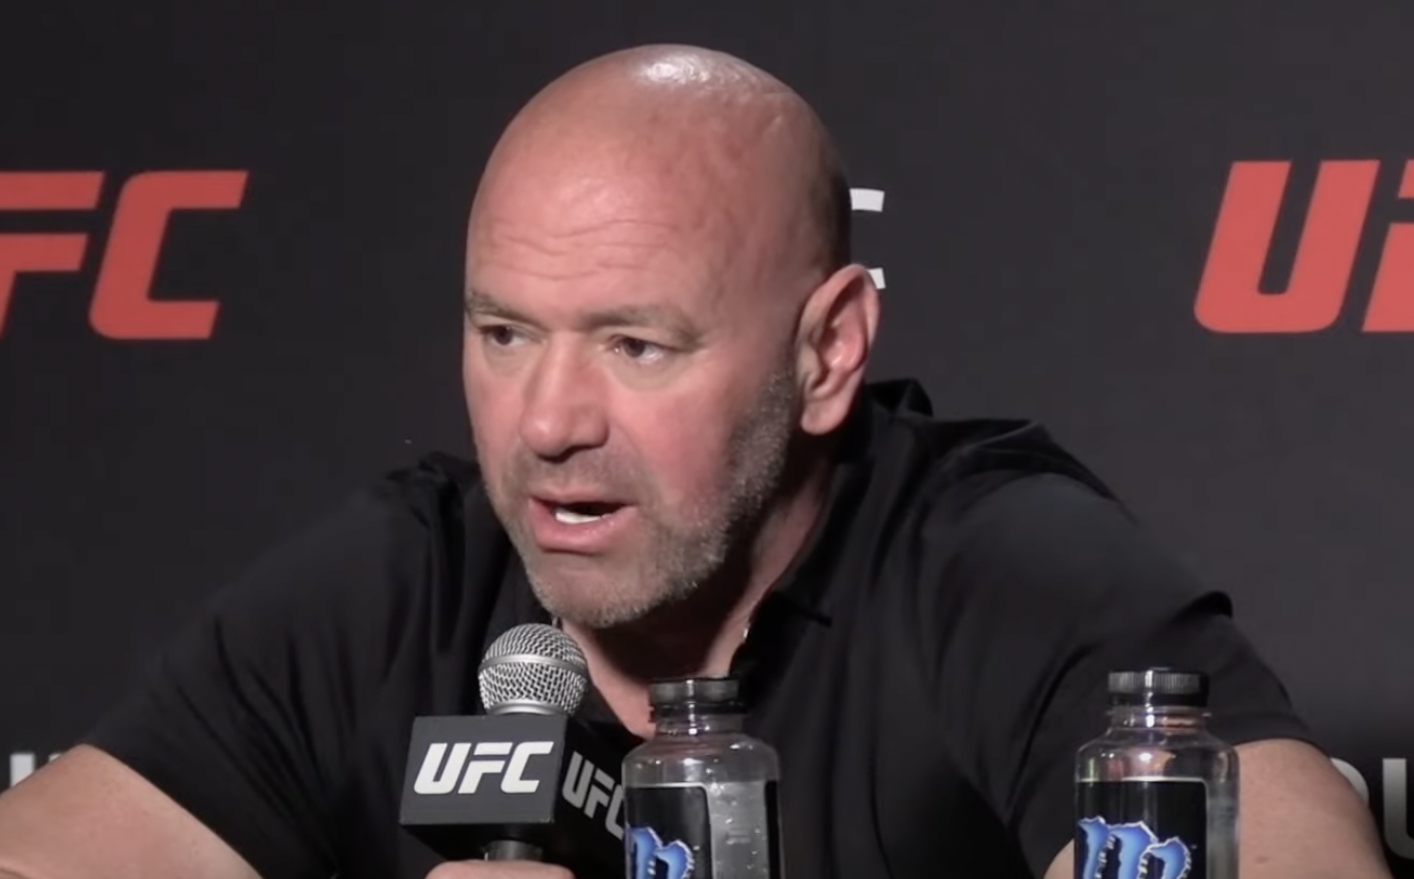 Dana White Says He Will Not Walk Away From UFC After Slapping Wife!! Cover Story Today